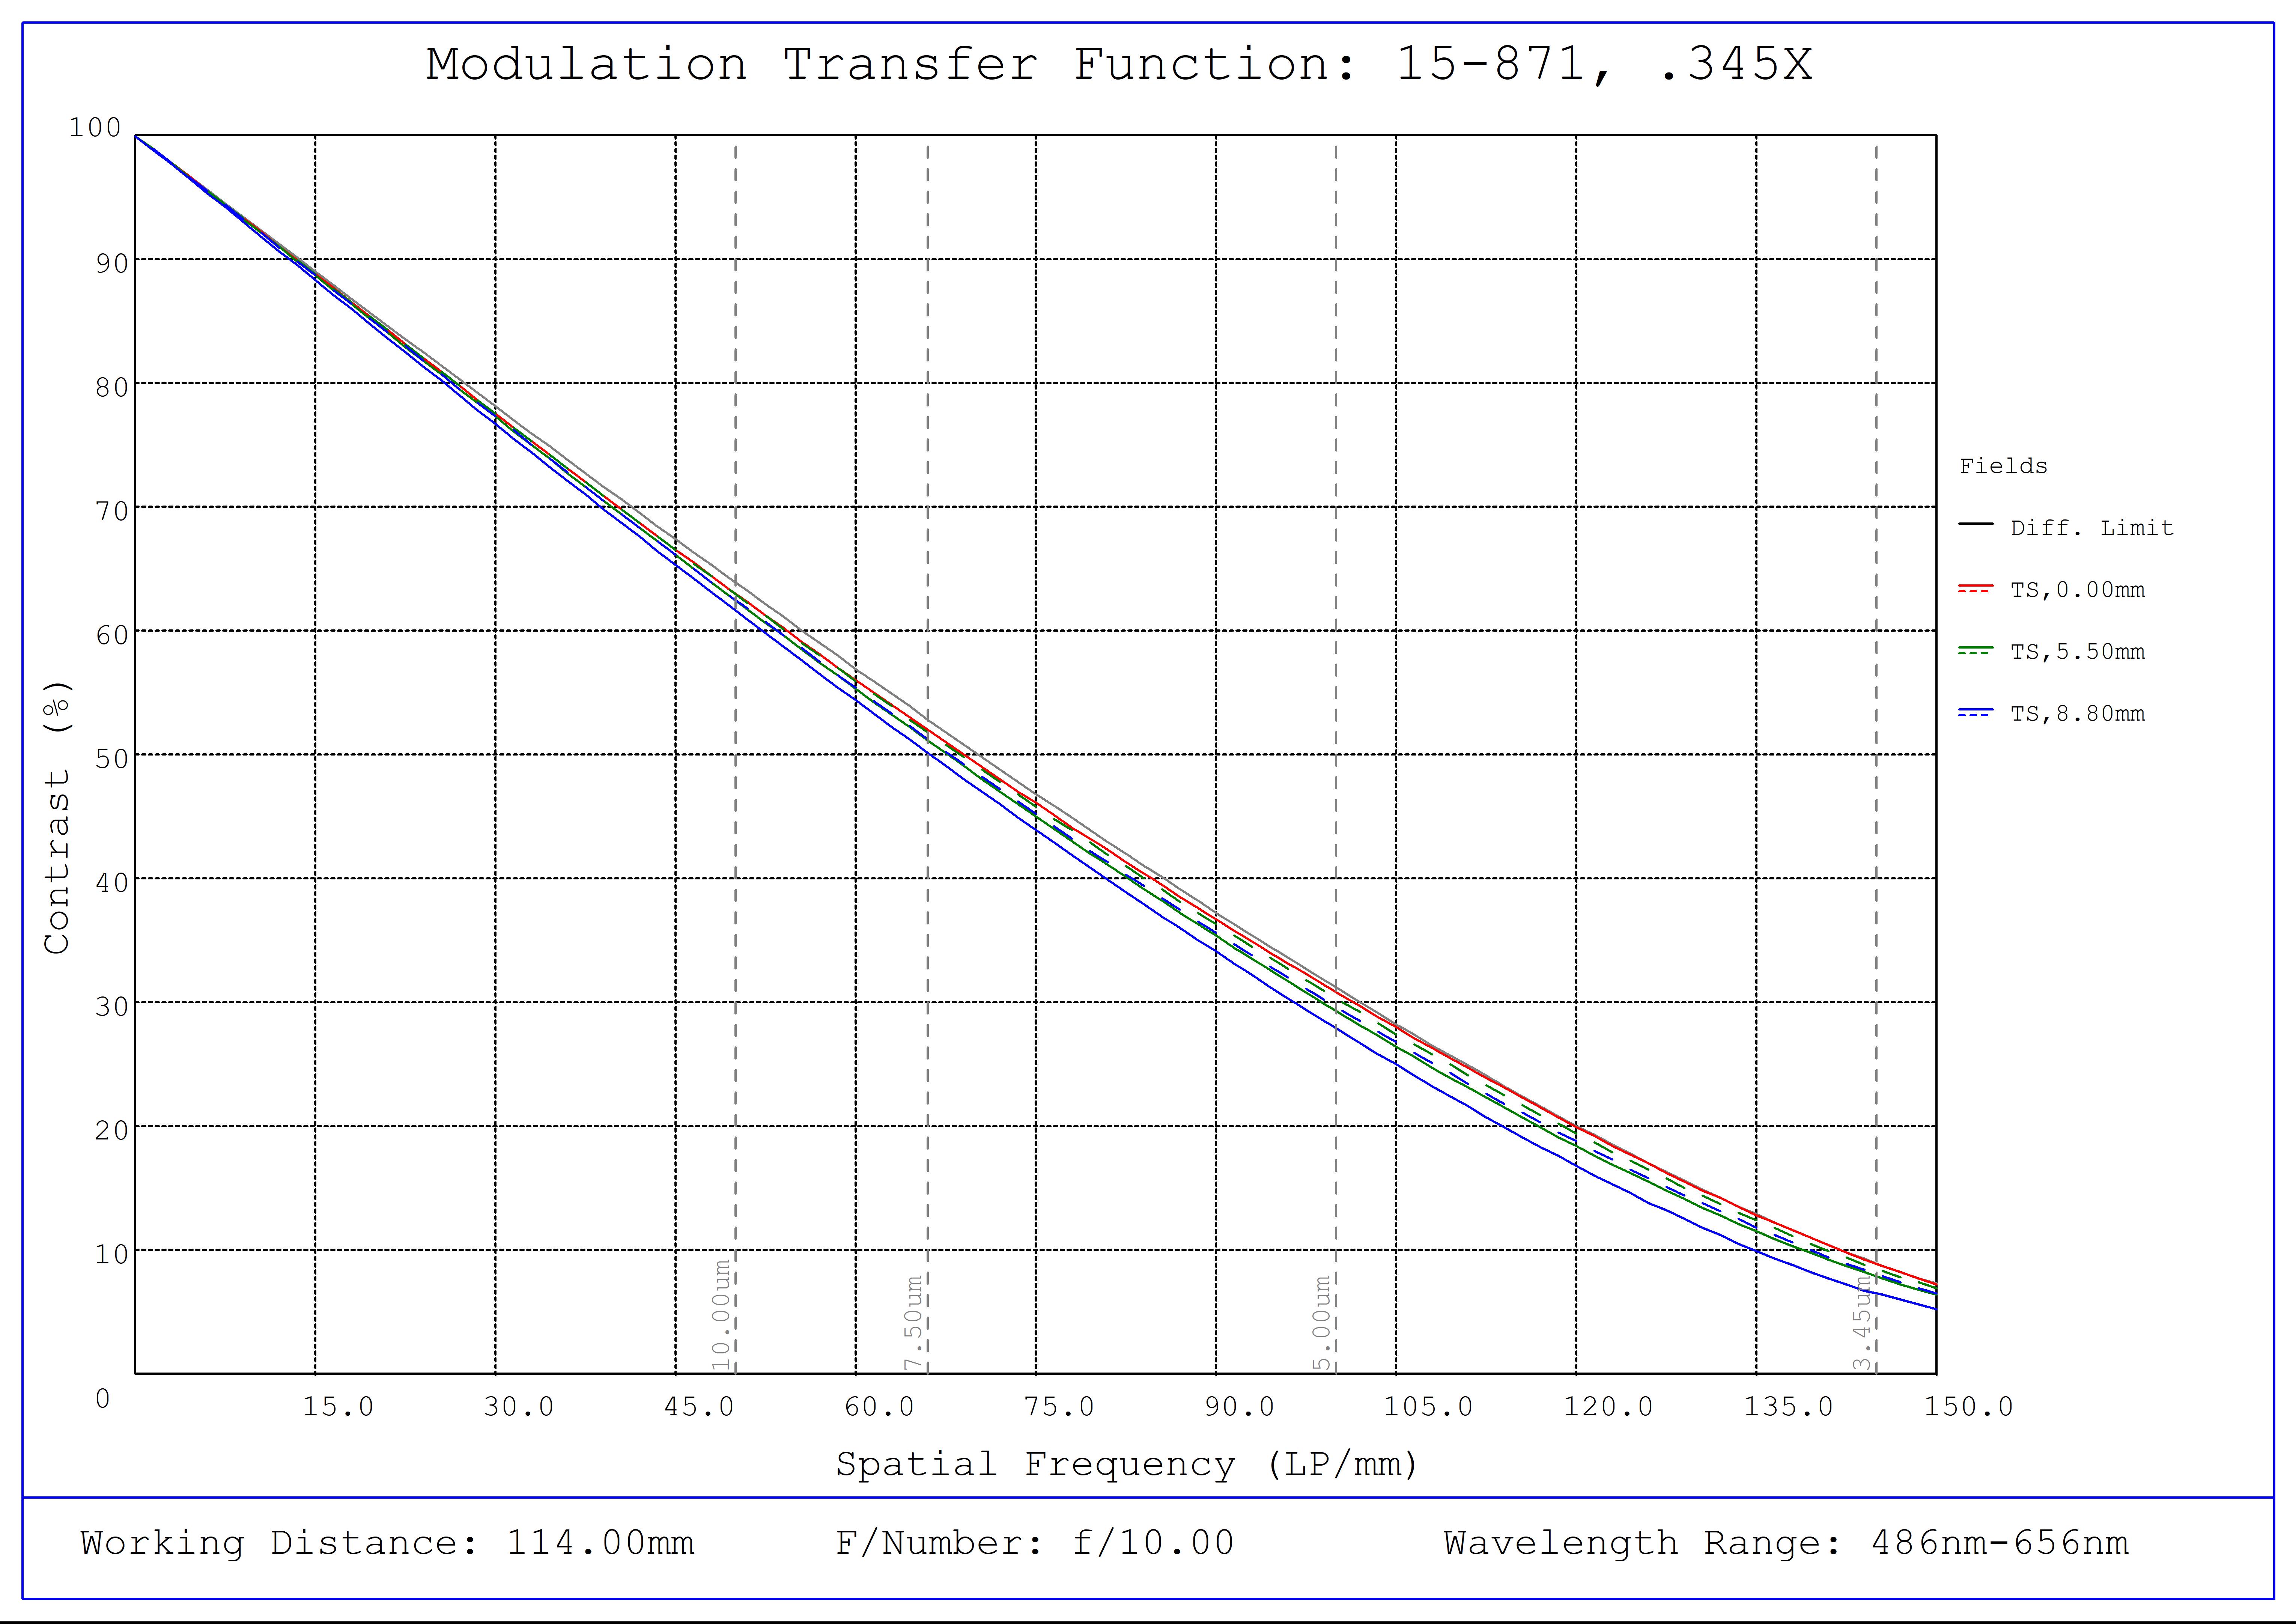 #15-871, 0.345X In-Line CobaltTL Telecentric Lens, Modulated Transfer Function (MTF) Plot, 114mm Working Distance, f10